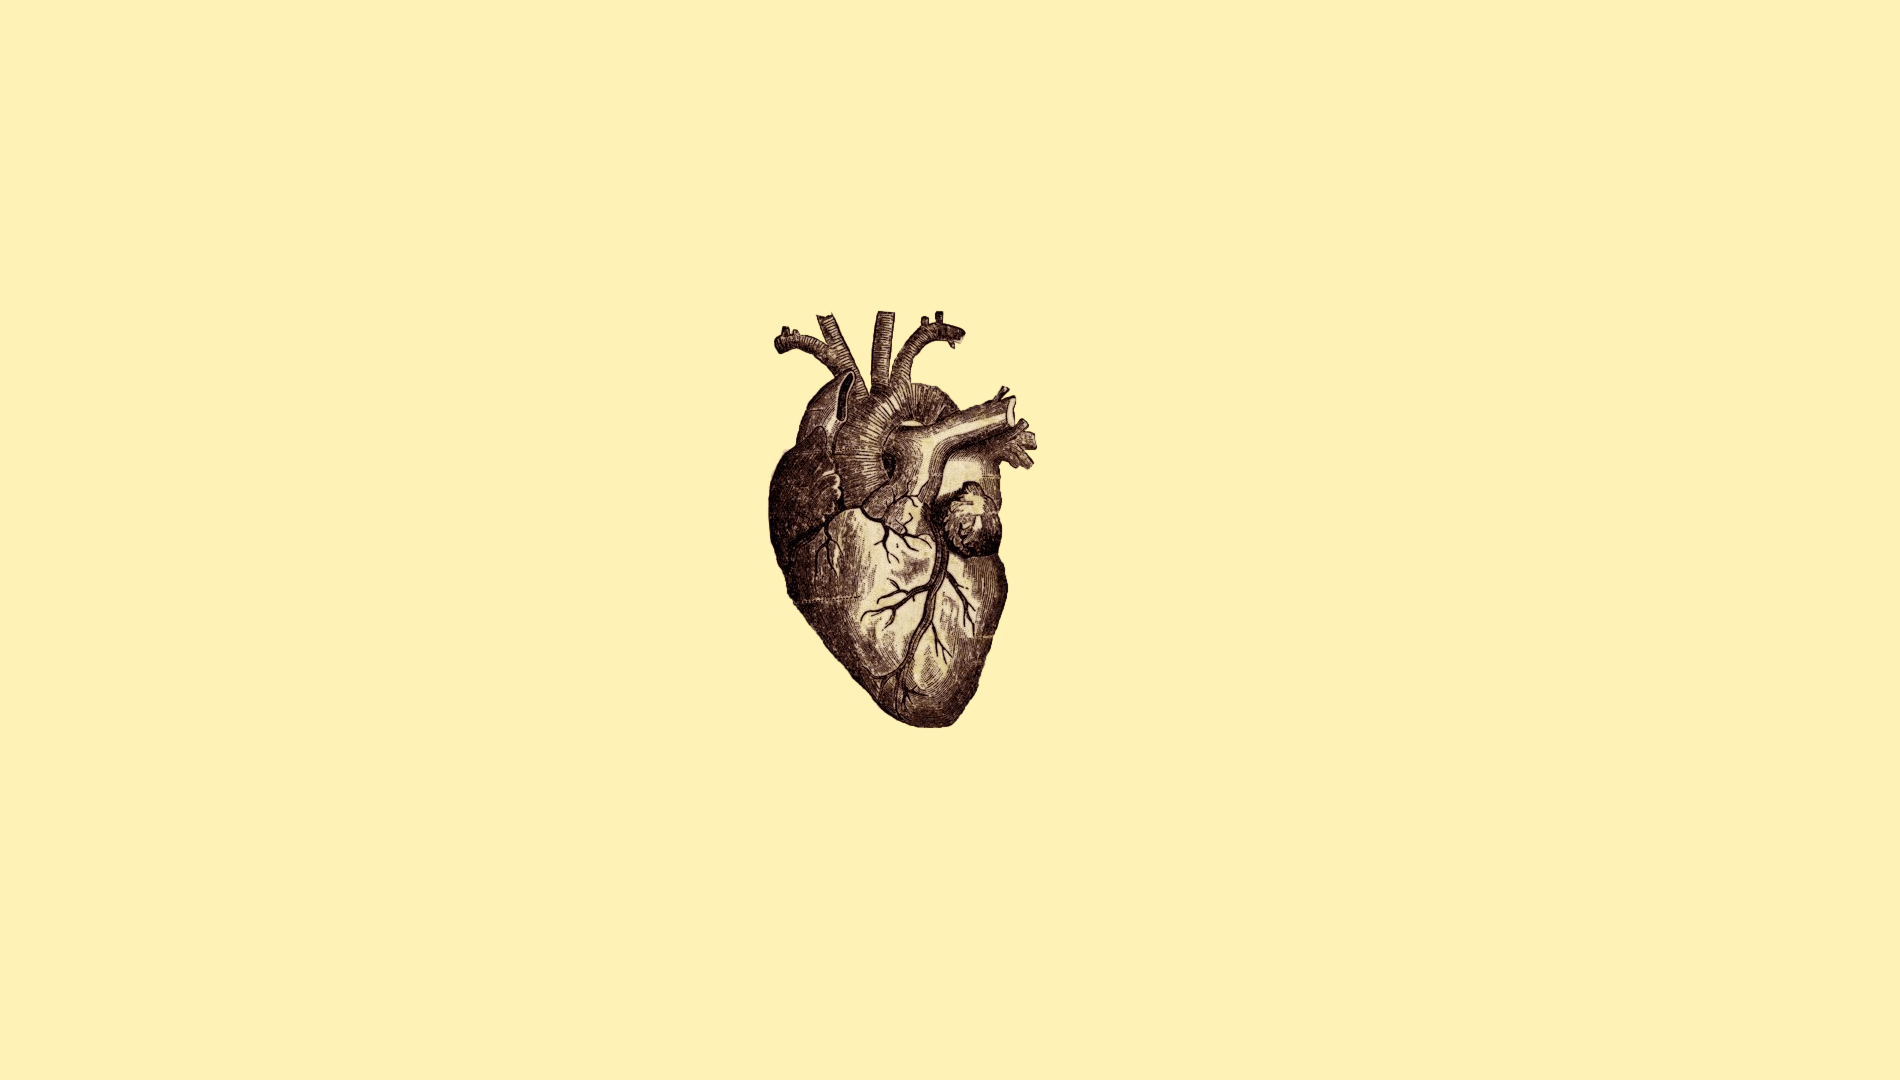 The heart is a symbol of love - Anatomy